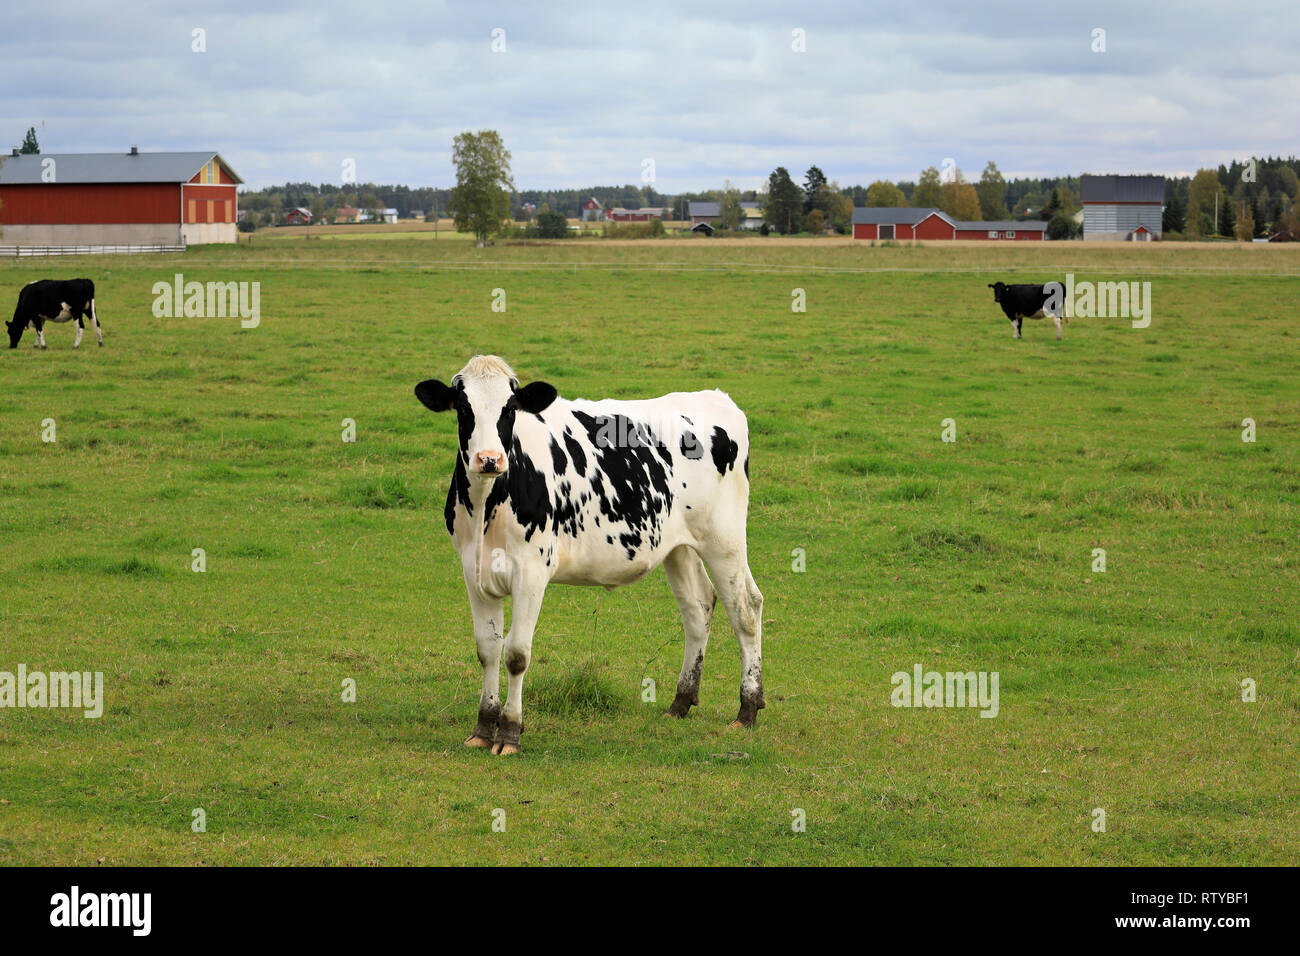 Young, curious Holstein-Friesian cow standing on green grassy cattle field on a day of summer. Stock Photo